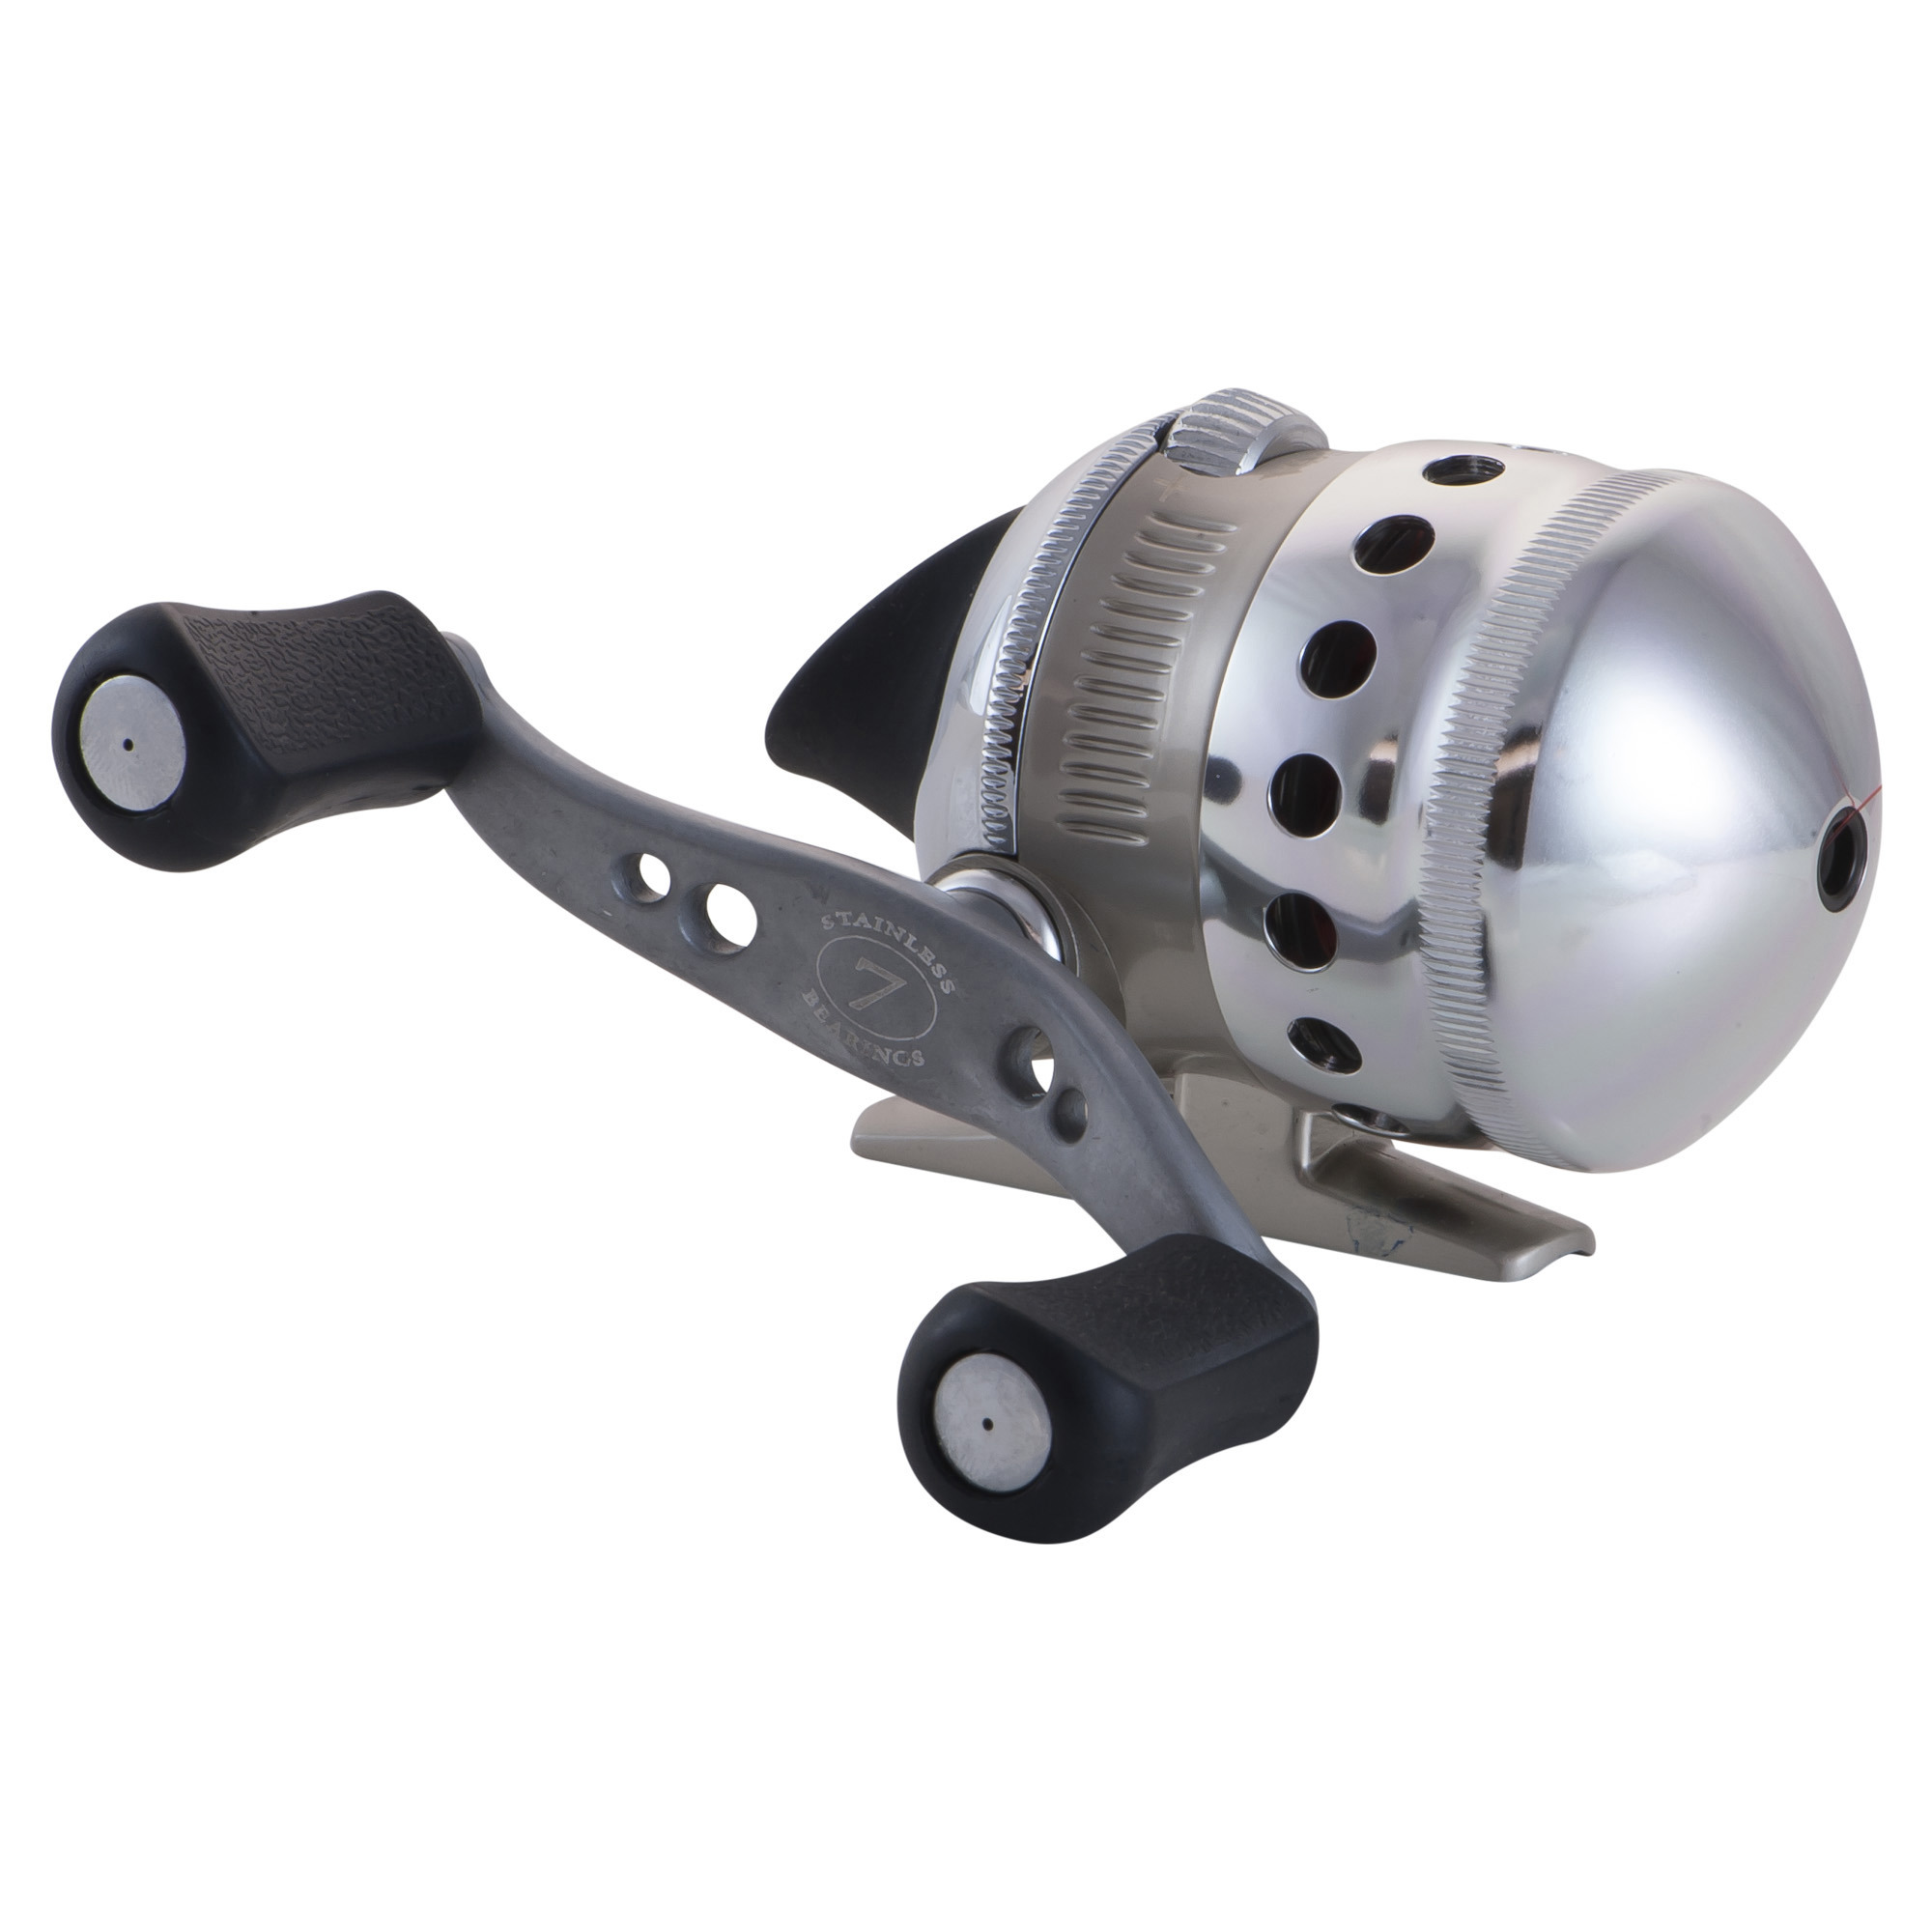 2) Zebco Fishing Reels (Omega 191 + One Classic) with Rods